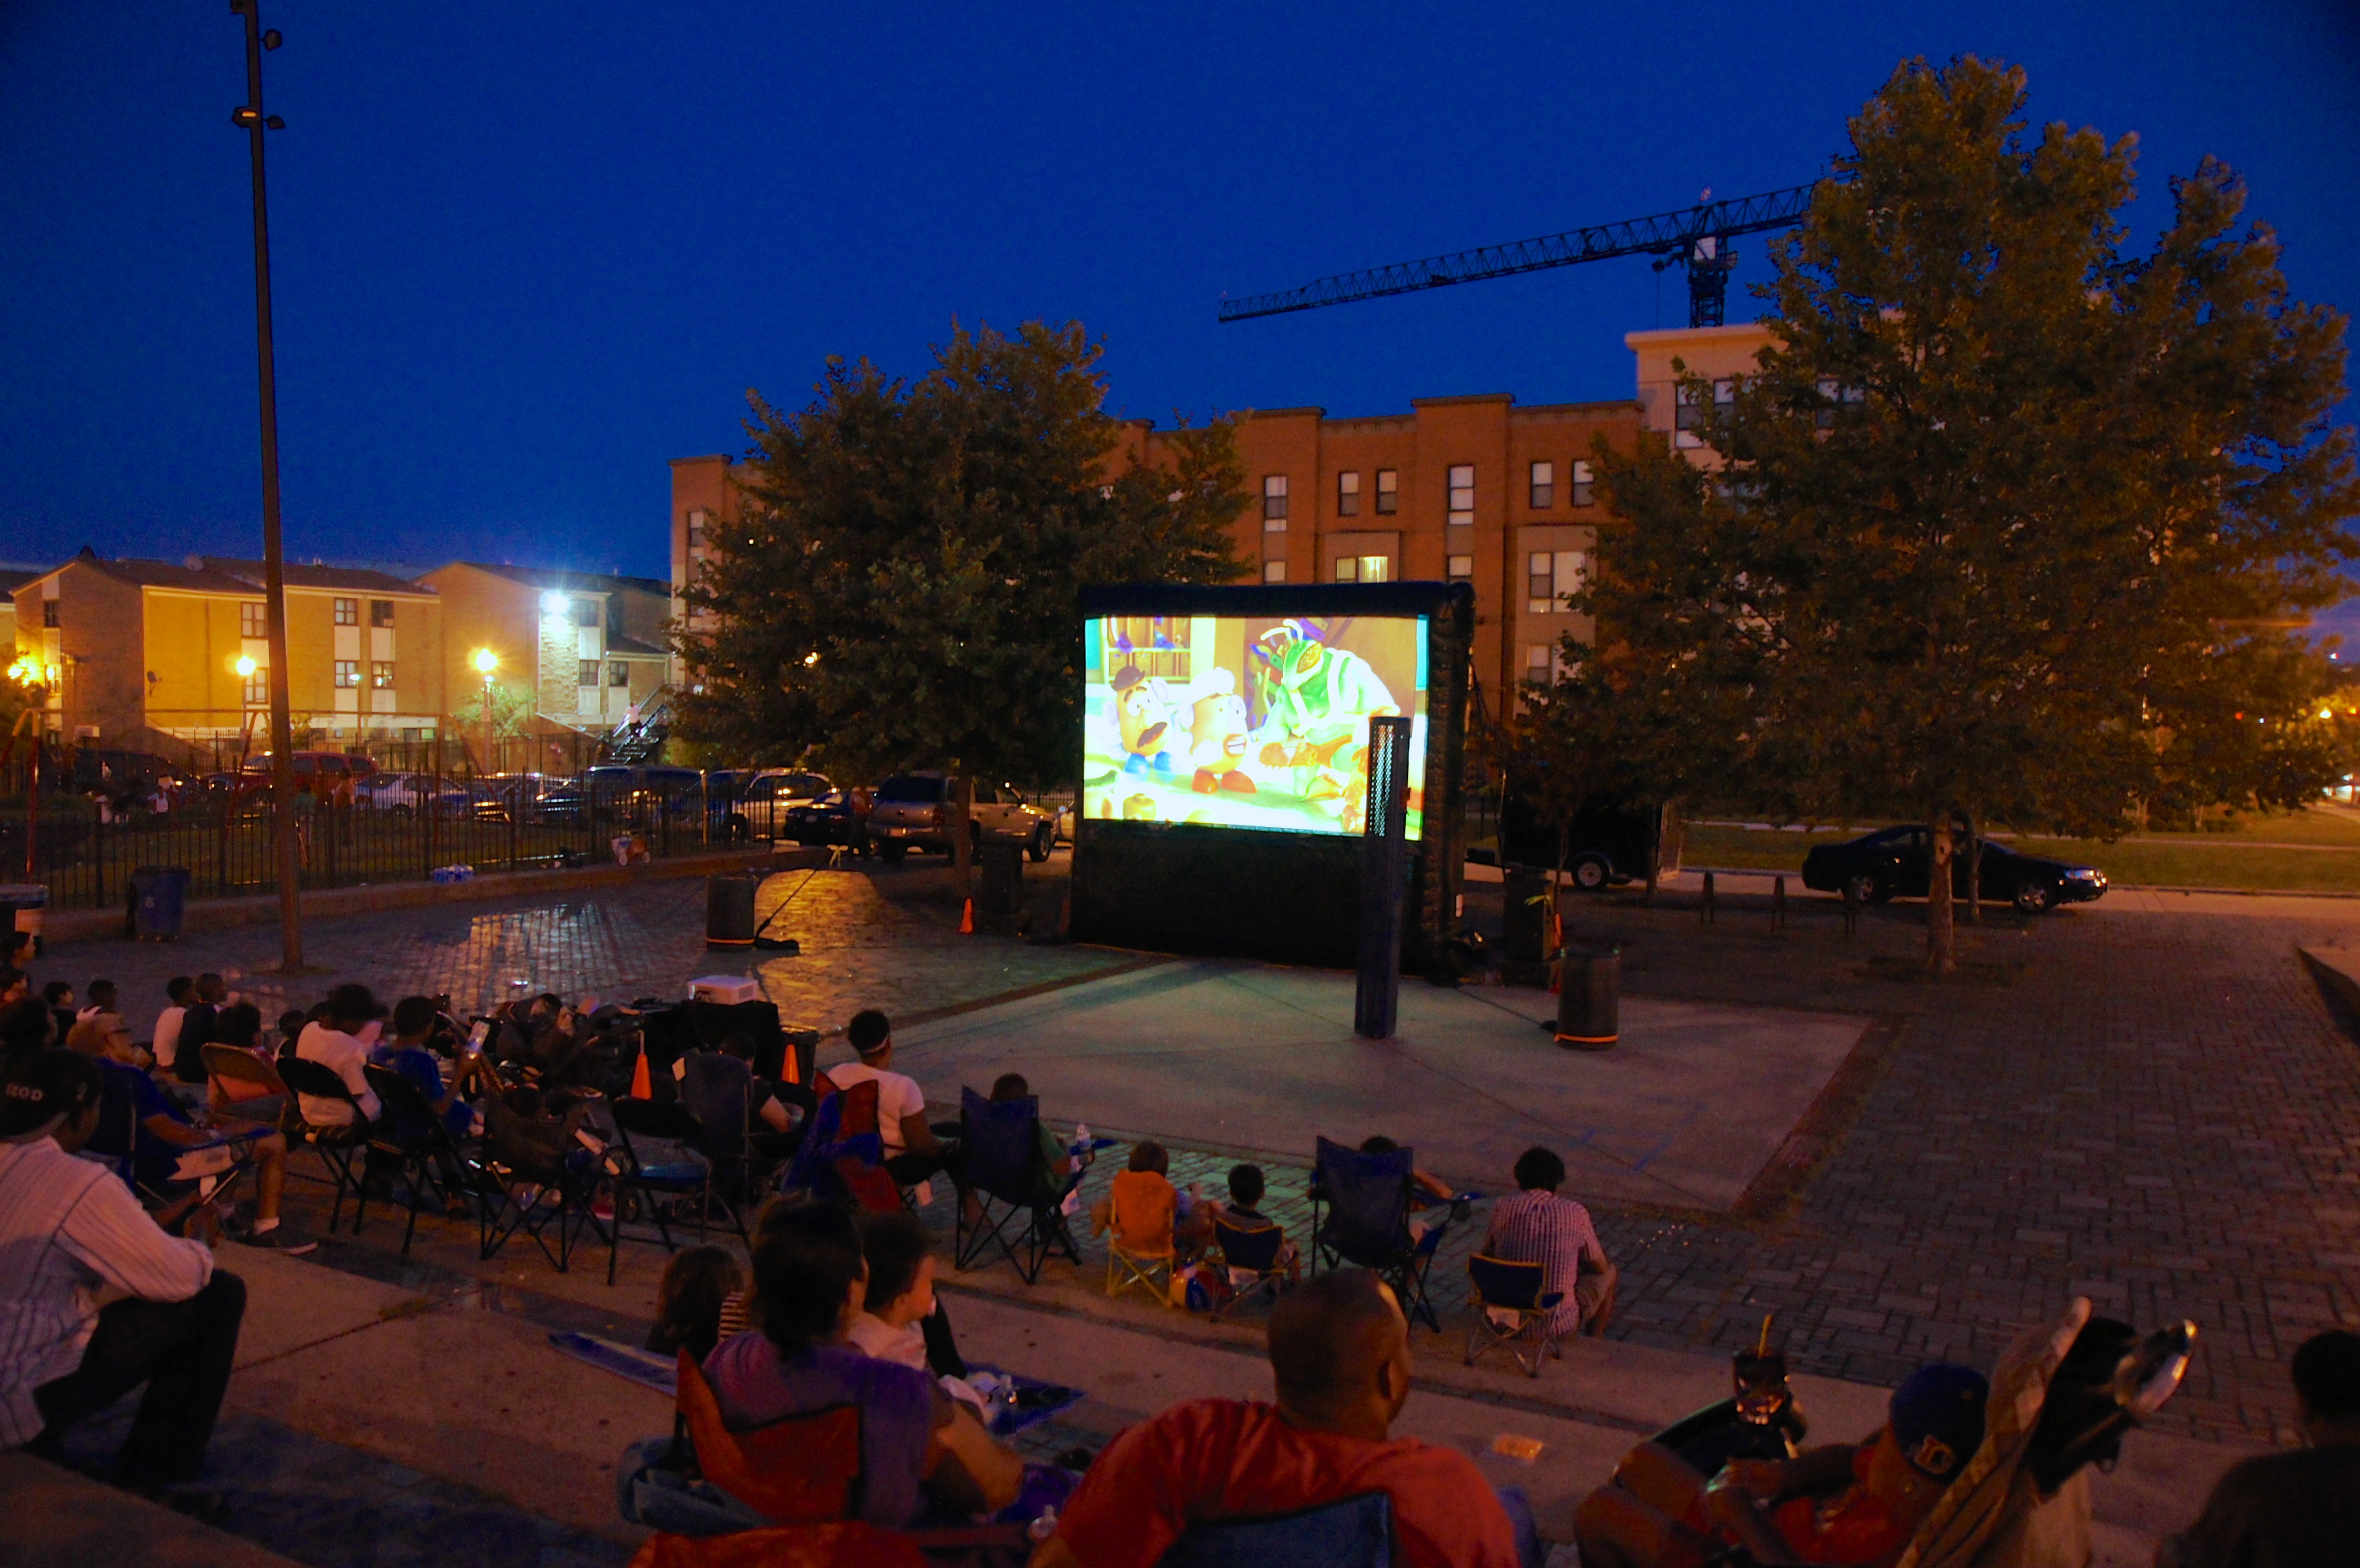 The NoMa Summer Screen movies from Loree Grand Field to Storey Park each Wednesday this summer through mid-August. (Photo: NoMA BID)